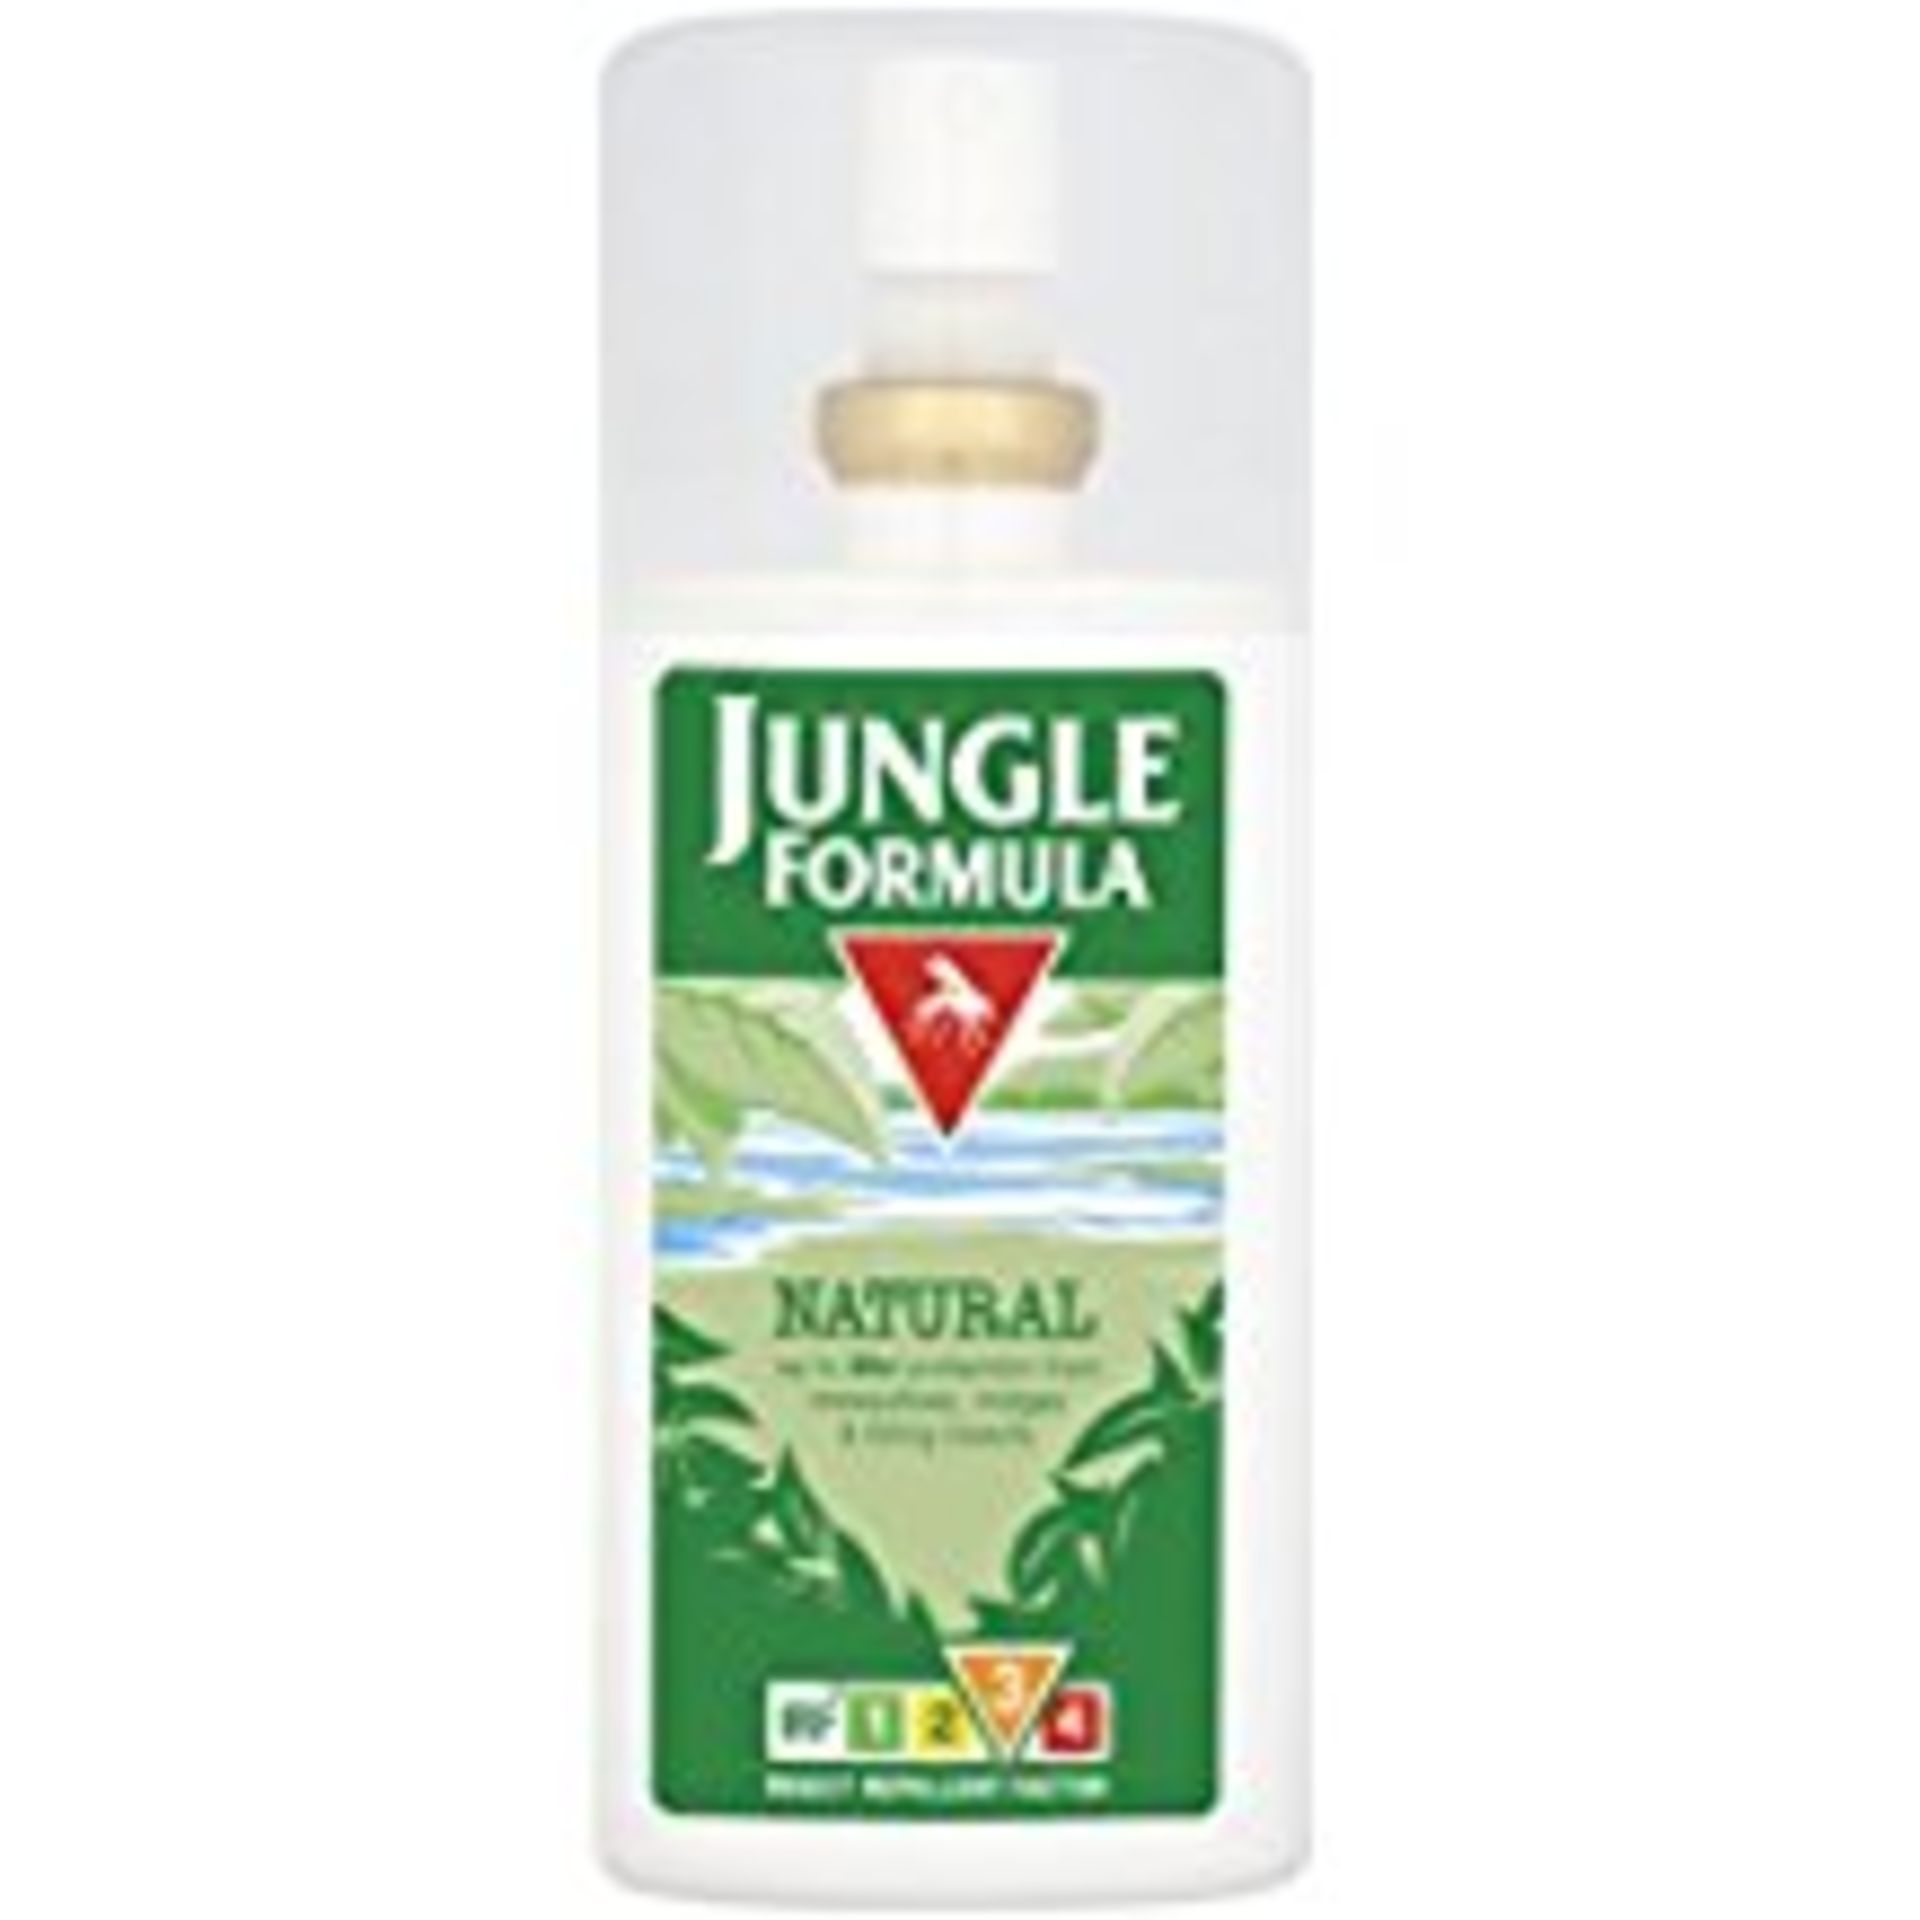 V Brand New 90ml Jungle Formula Natural Insect Repellent-Up To 8 Hours Protection From Mosquitoes-